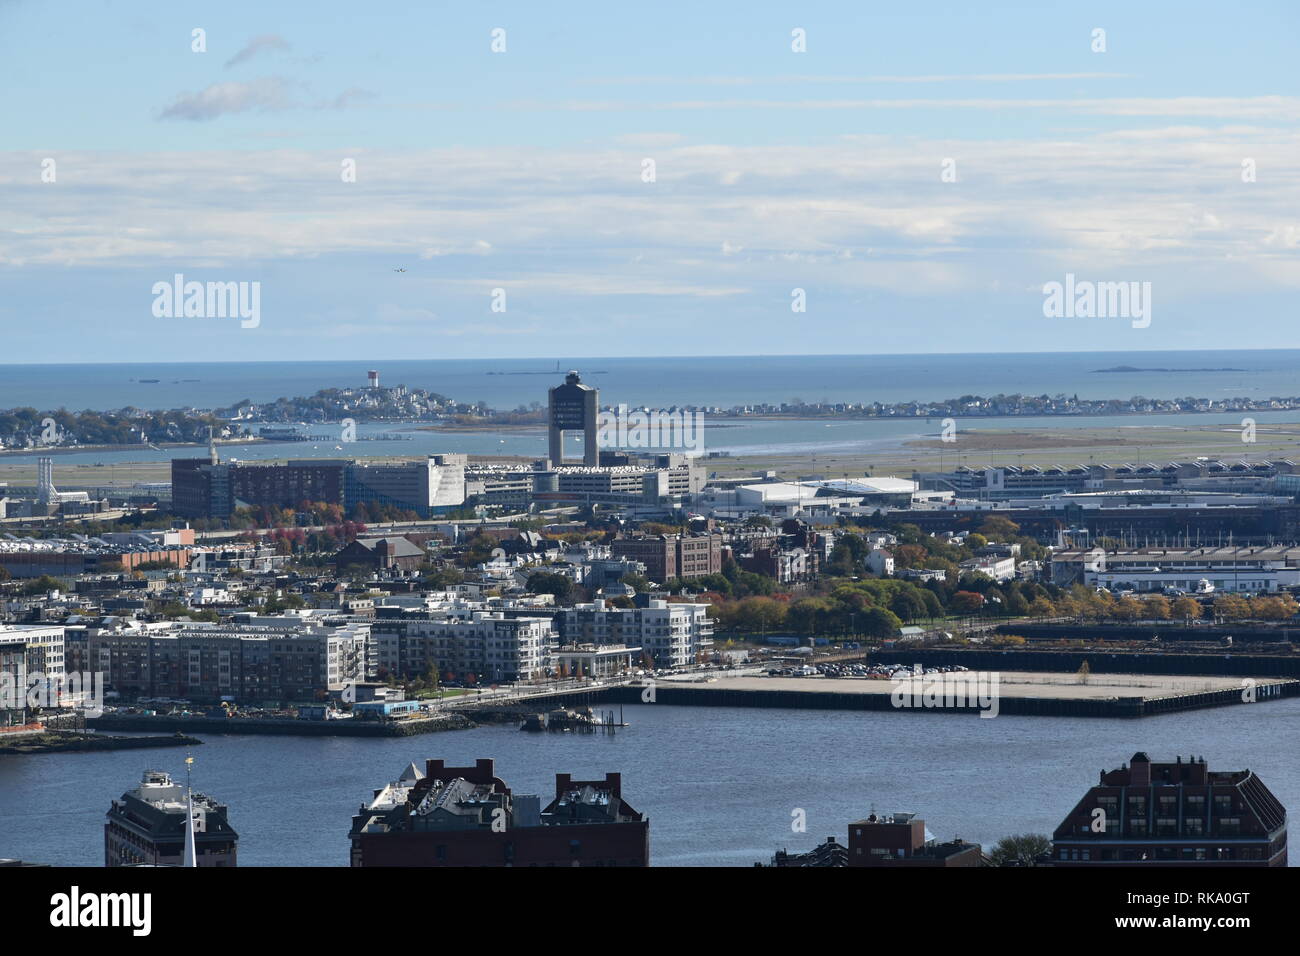 View of the Boston skyline seen from the Avalon North Station roof deck 400 feet above the city streets, Boston, Massachusetts, USA Stock Photo